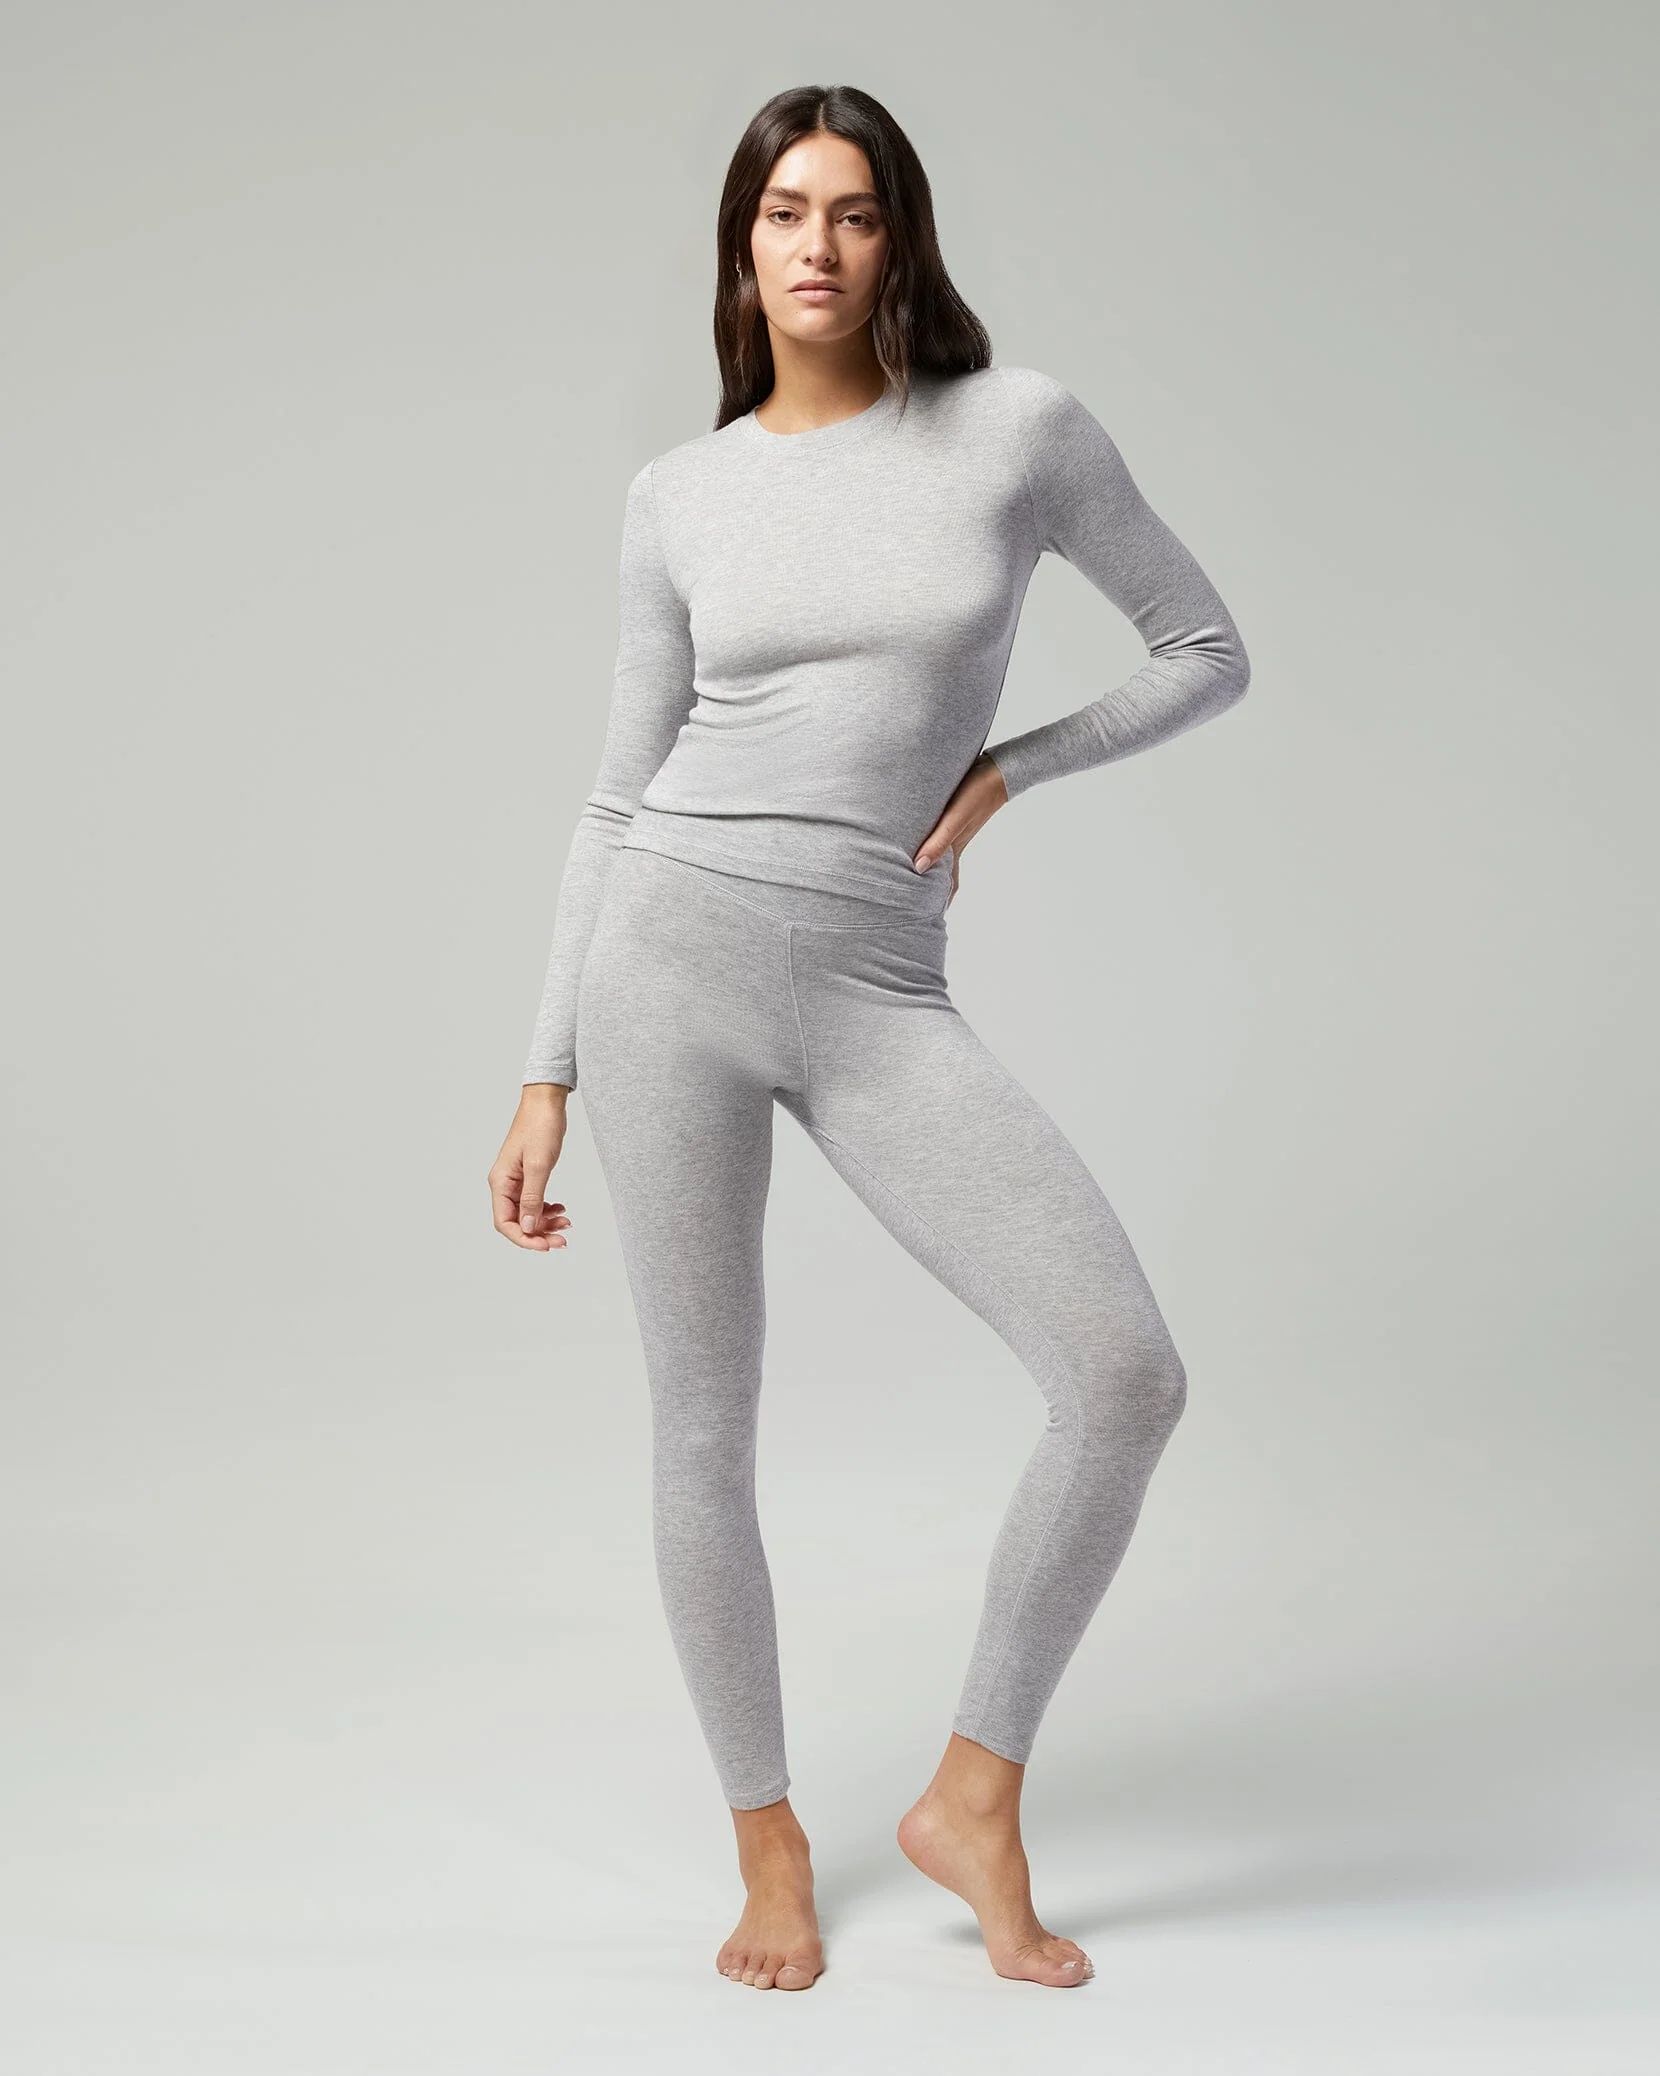 Butter Knit Lounge Legging | IVL COLLECTIVE